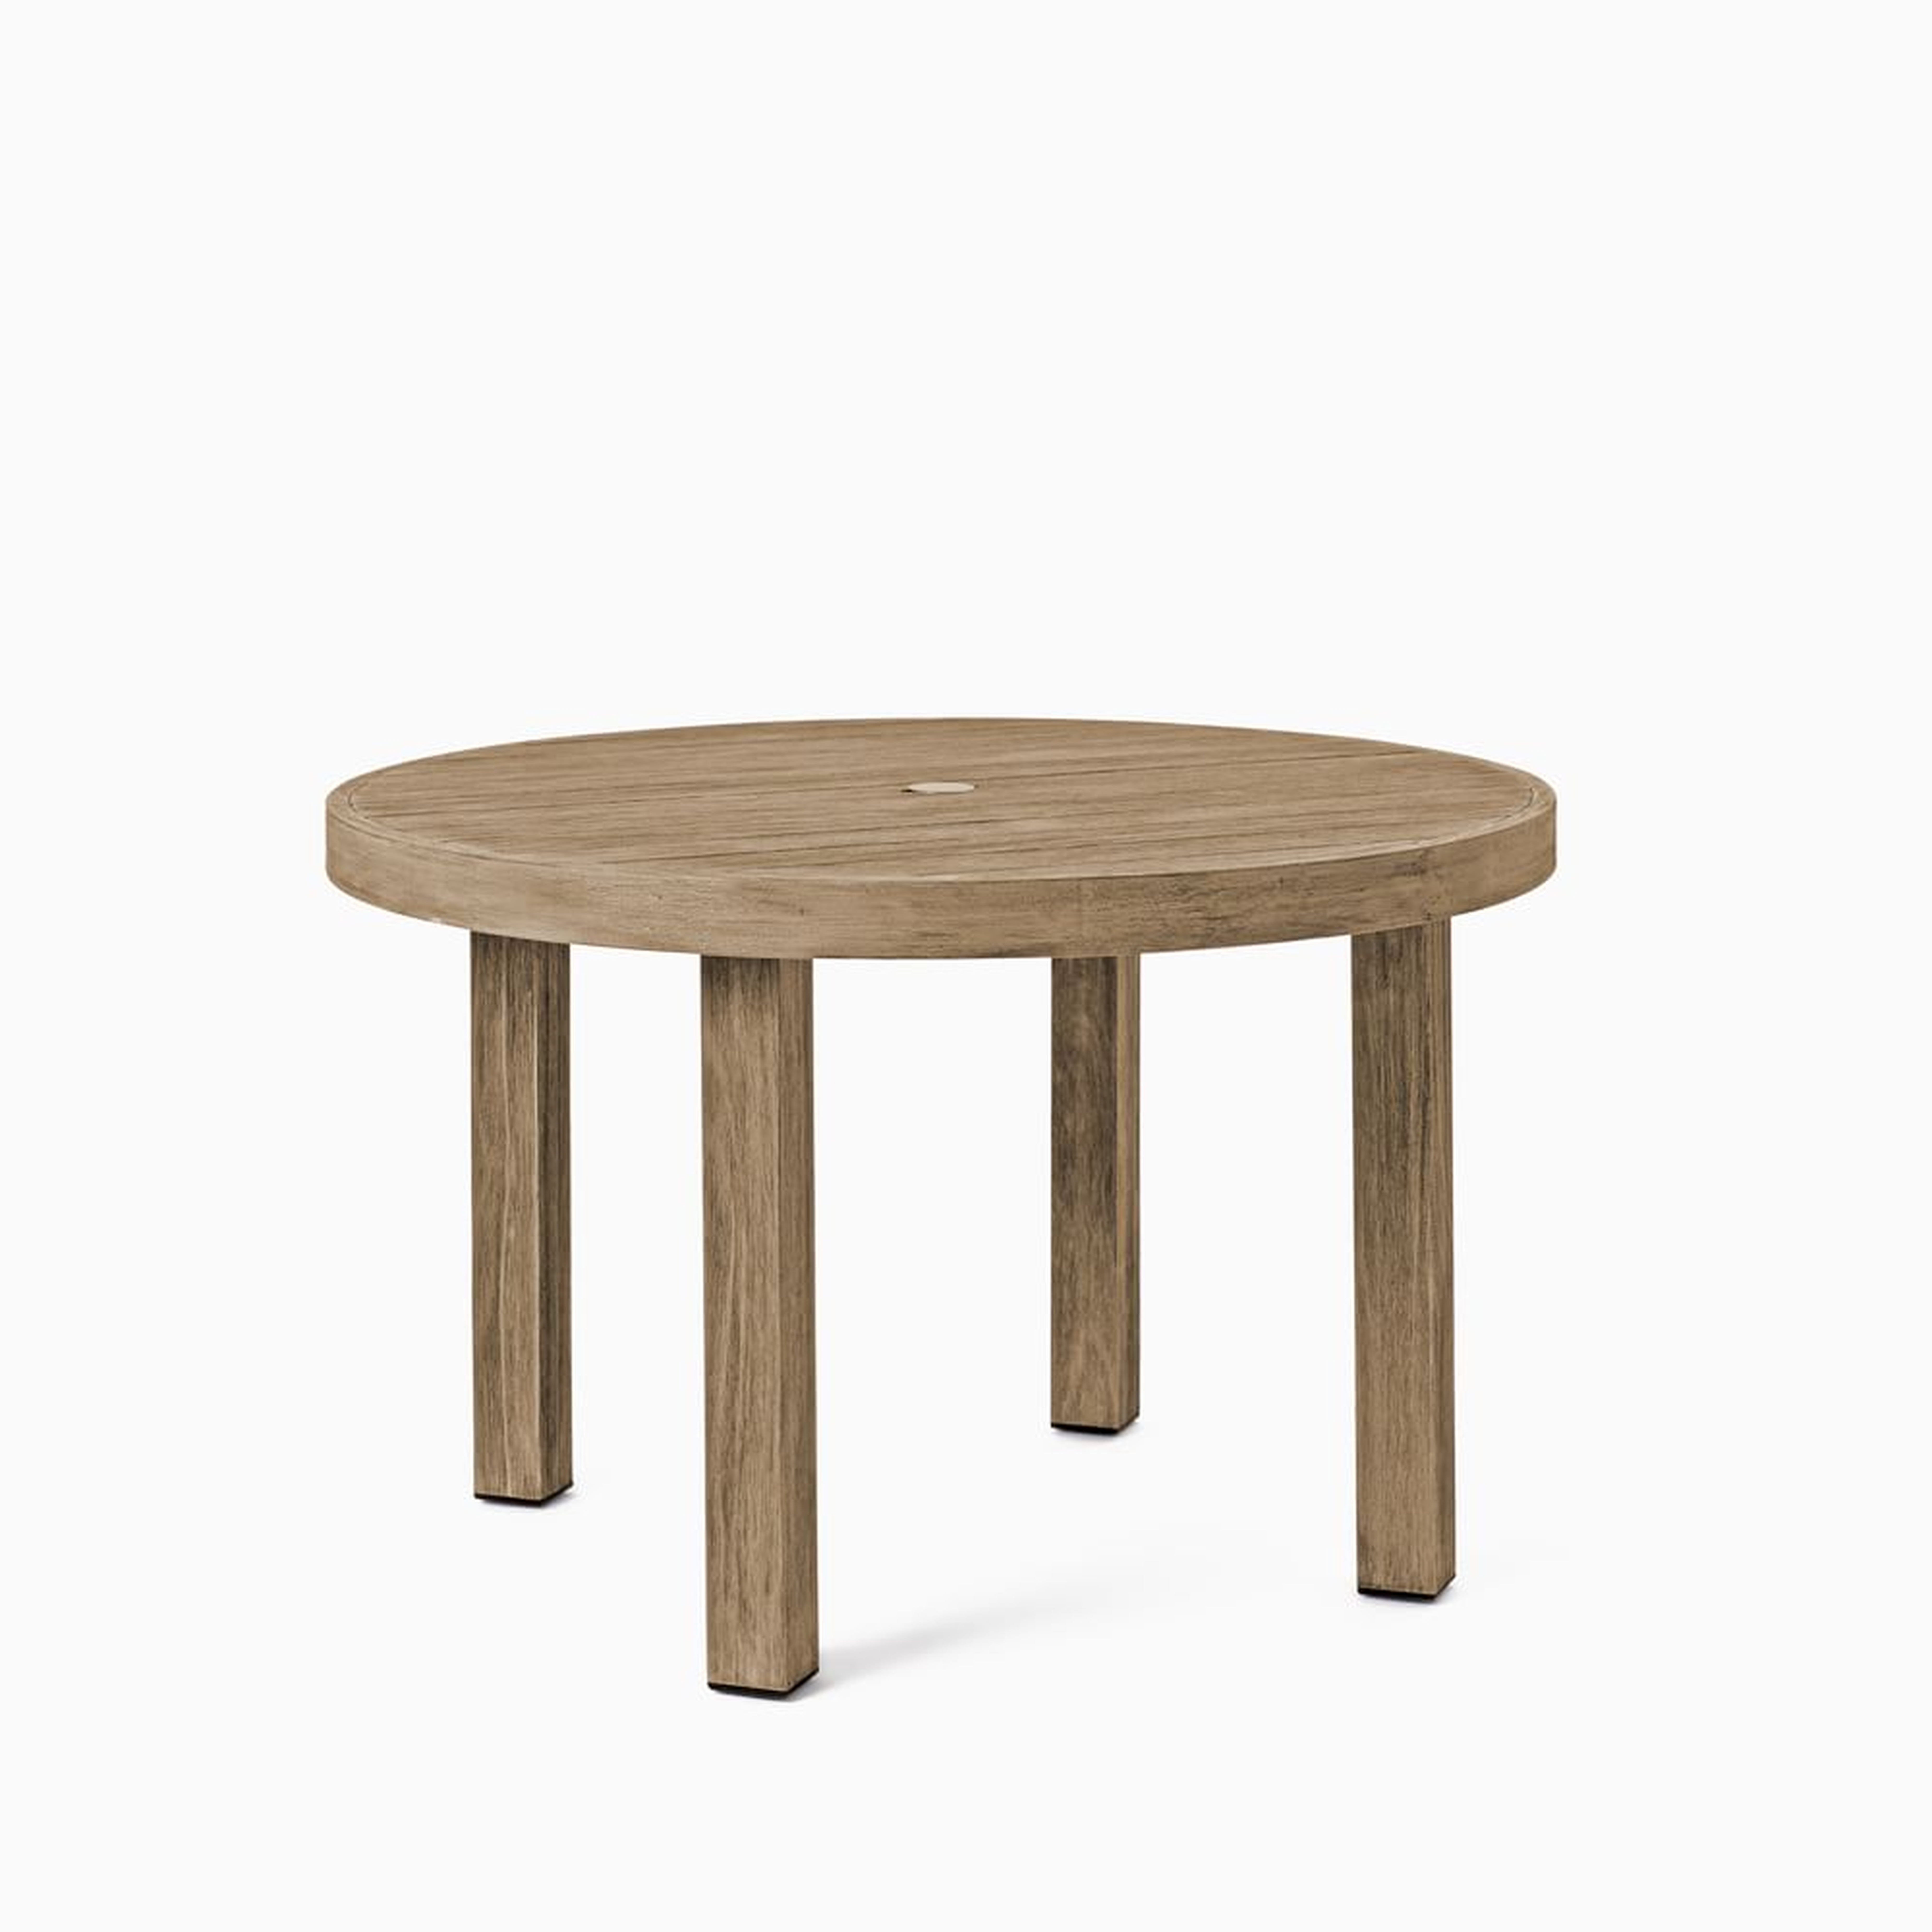 Portside Outdoor 48" Round Dining Table, Driftwood - West Elm